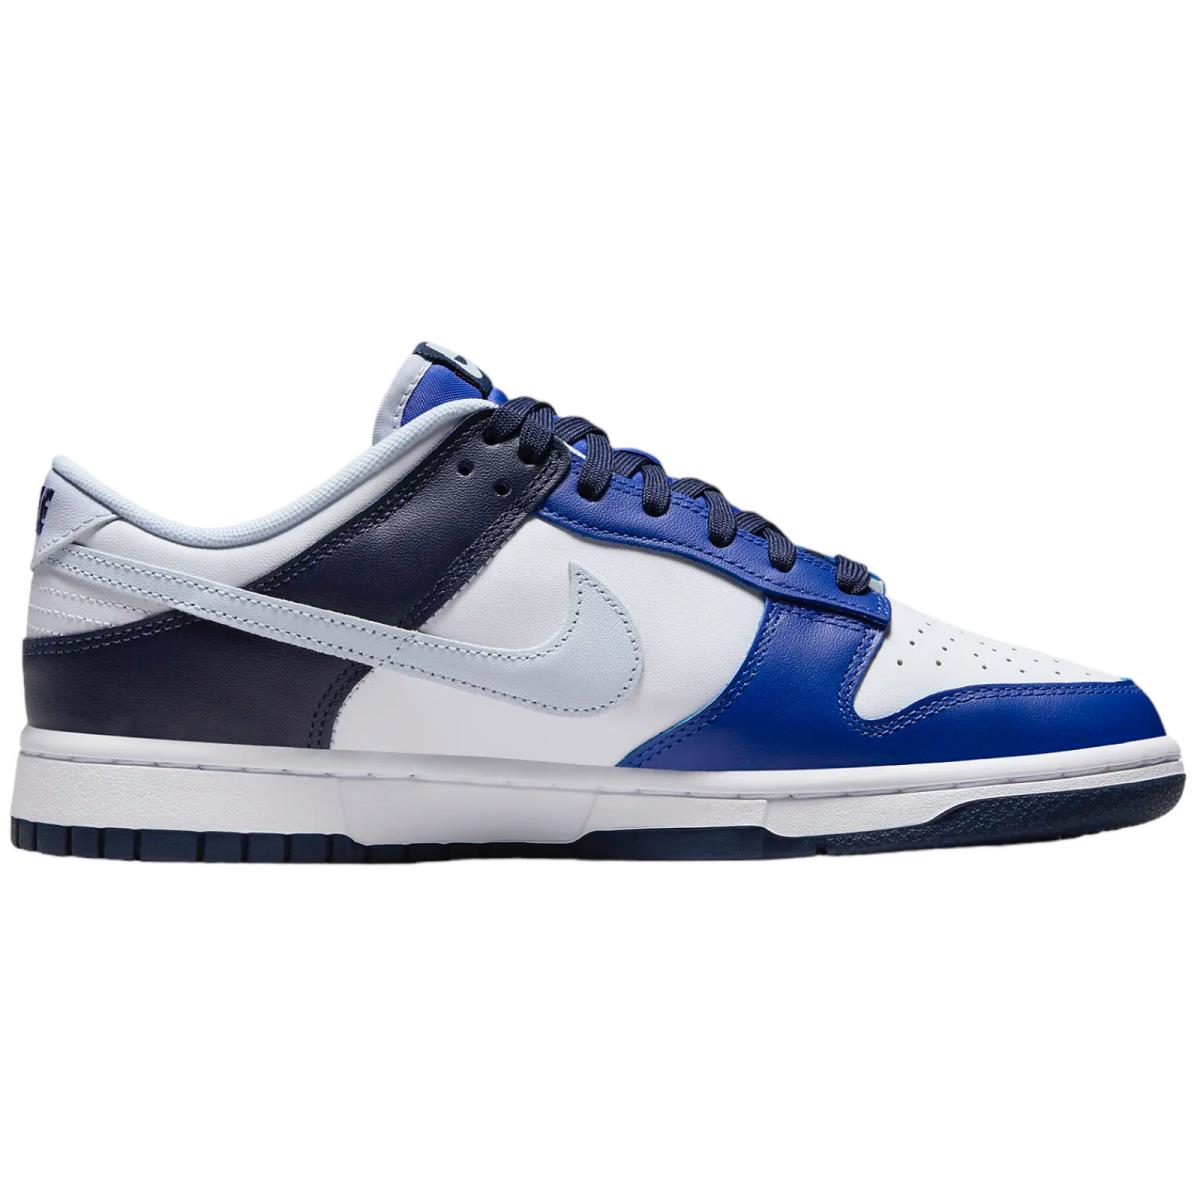 Nike Dunk Low Retro Men`s Casual Shoes All Colors US Sizes 7-14 White/Game Royal/Midnight Navy/Football Grey